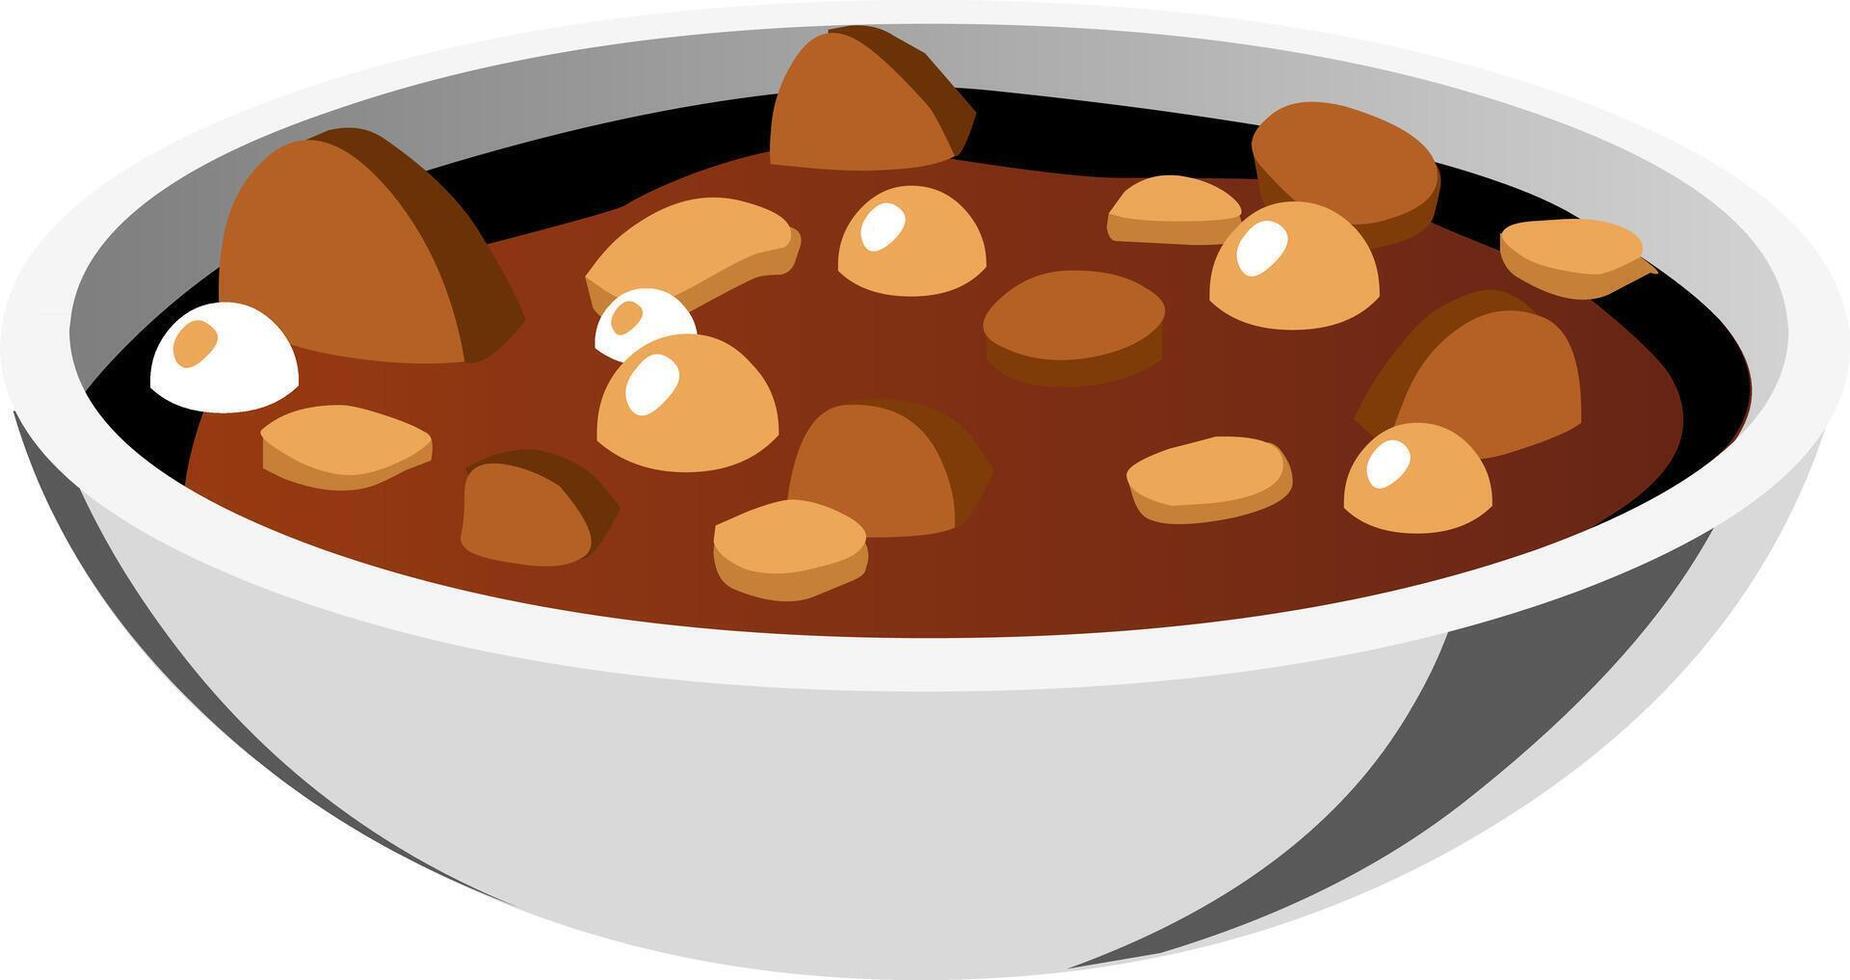 Illustration of a Bowl of Chocolate Pudding With Chocolate Chips on a White Background vector